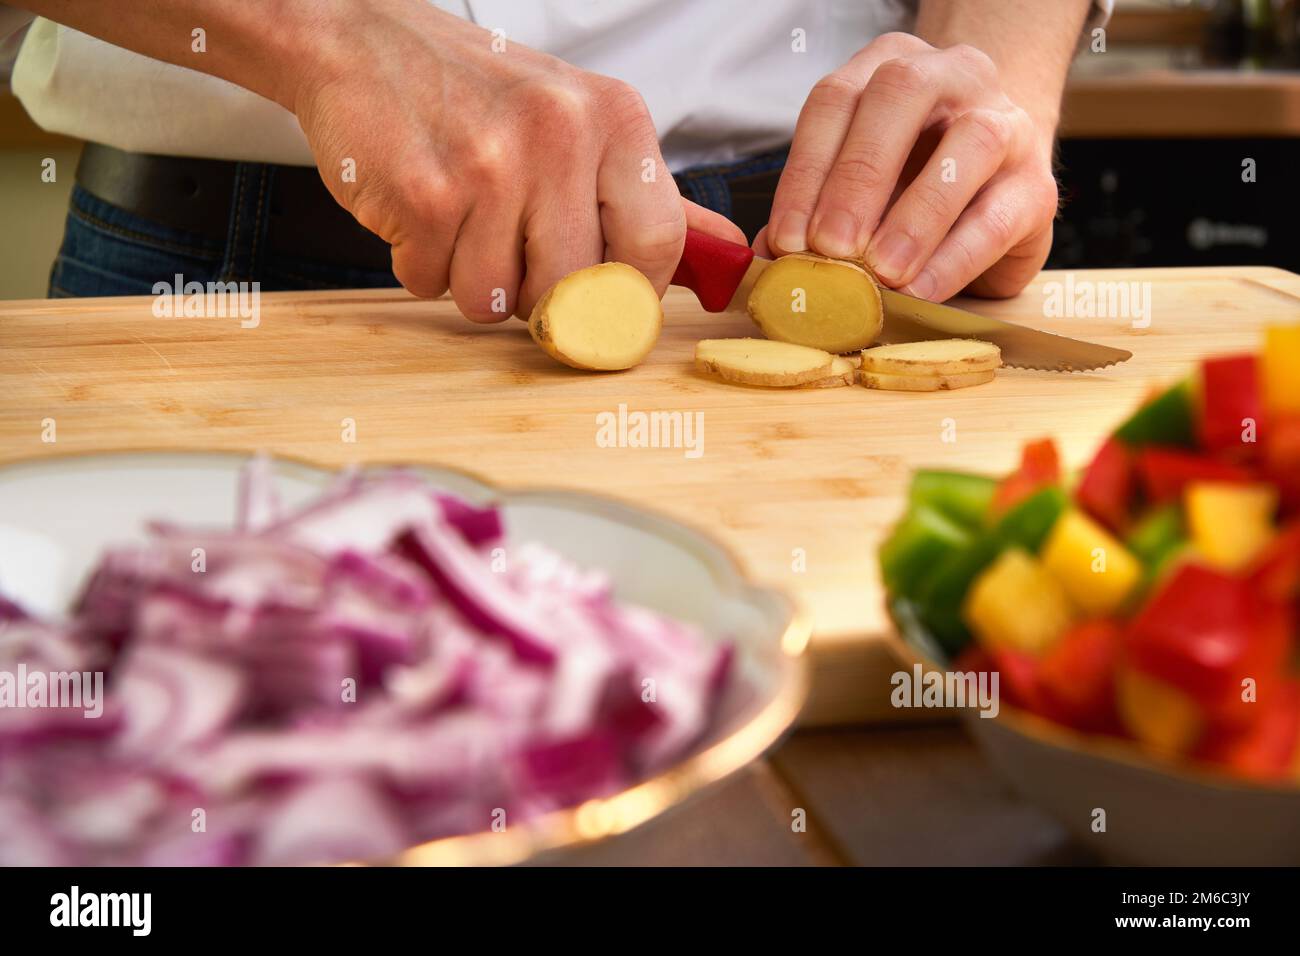 Man's hands cutting fresh tomatos in the kitchen, preparing a meal for lunch. Topdown view. Stock Photo